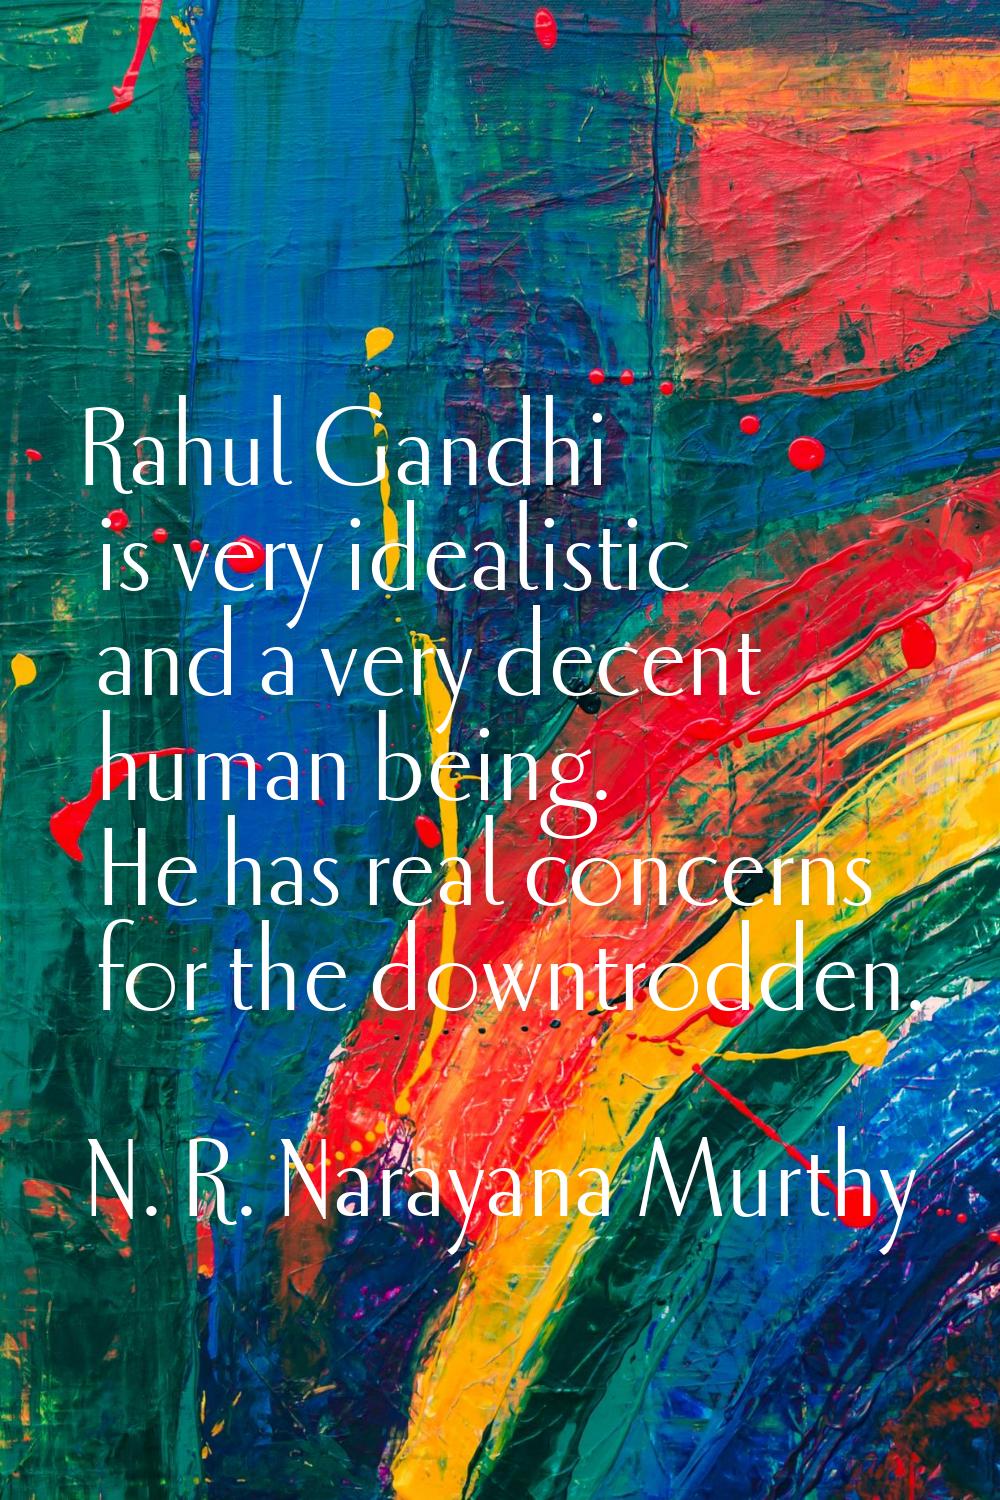 Rahul Gandhi is very idealistic and a very decent human being. He has real concerns for the downtro